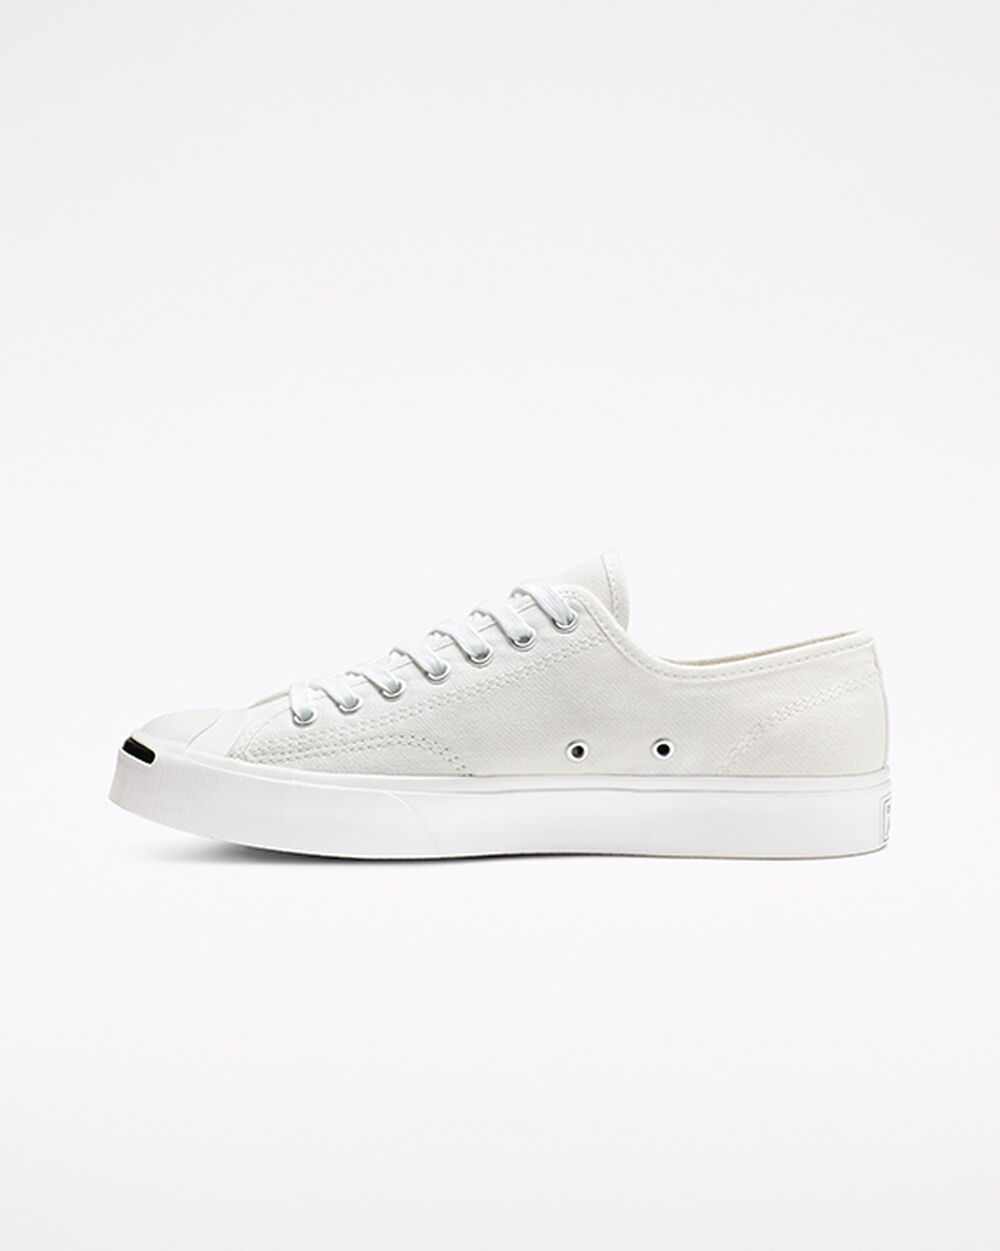 Tenis Converse Jack Purcell Mujer Blancos Negros | Mexico-835646